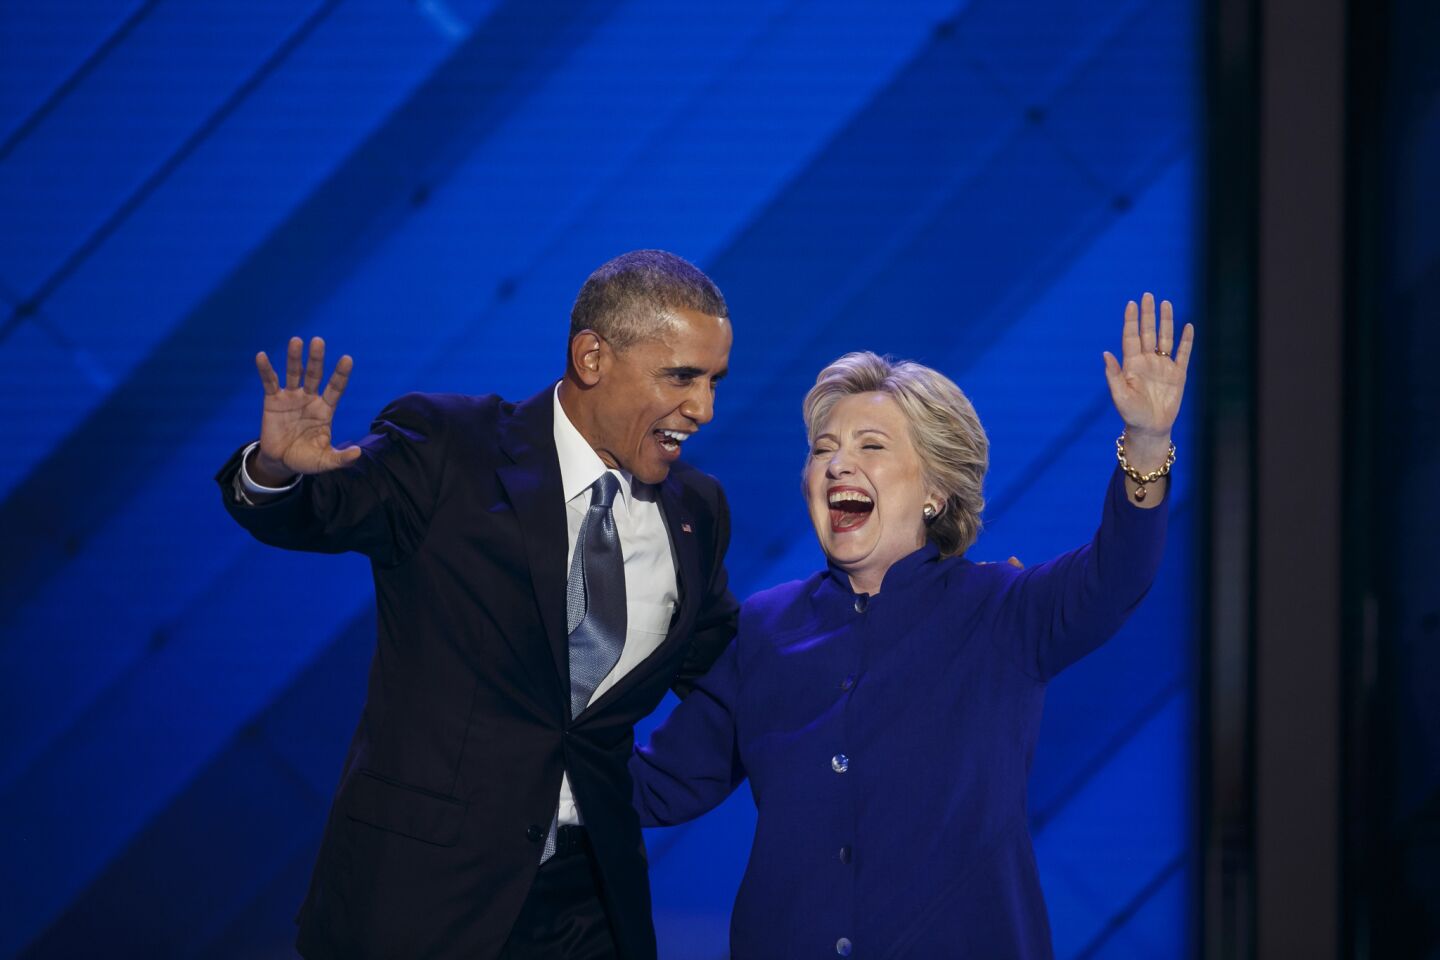 President Barack Obama and Democratic nominee for President Hillary Clinton wave at the crowd at the 2016 Democratic National Convention in Philadelphia.